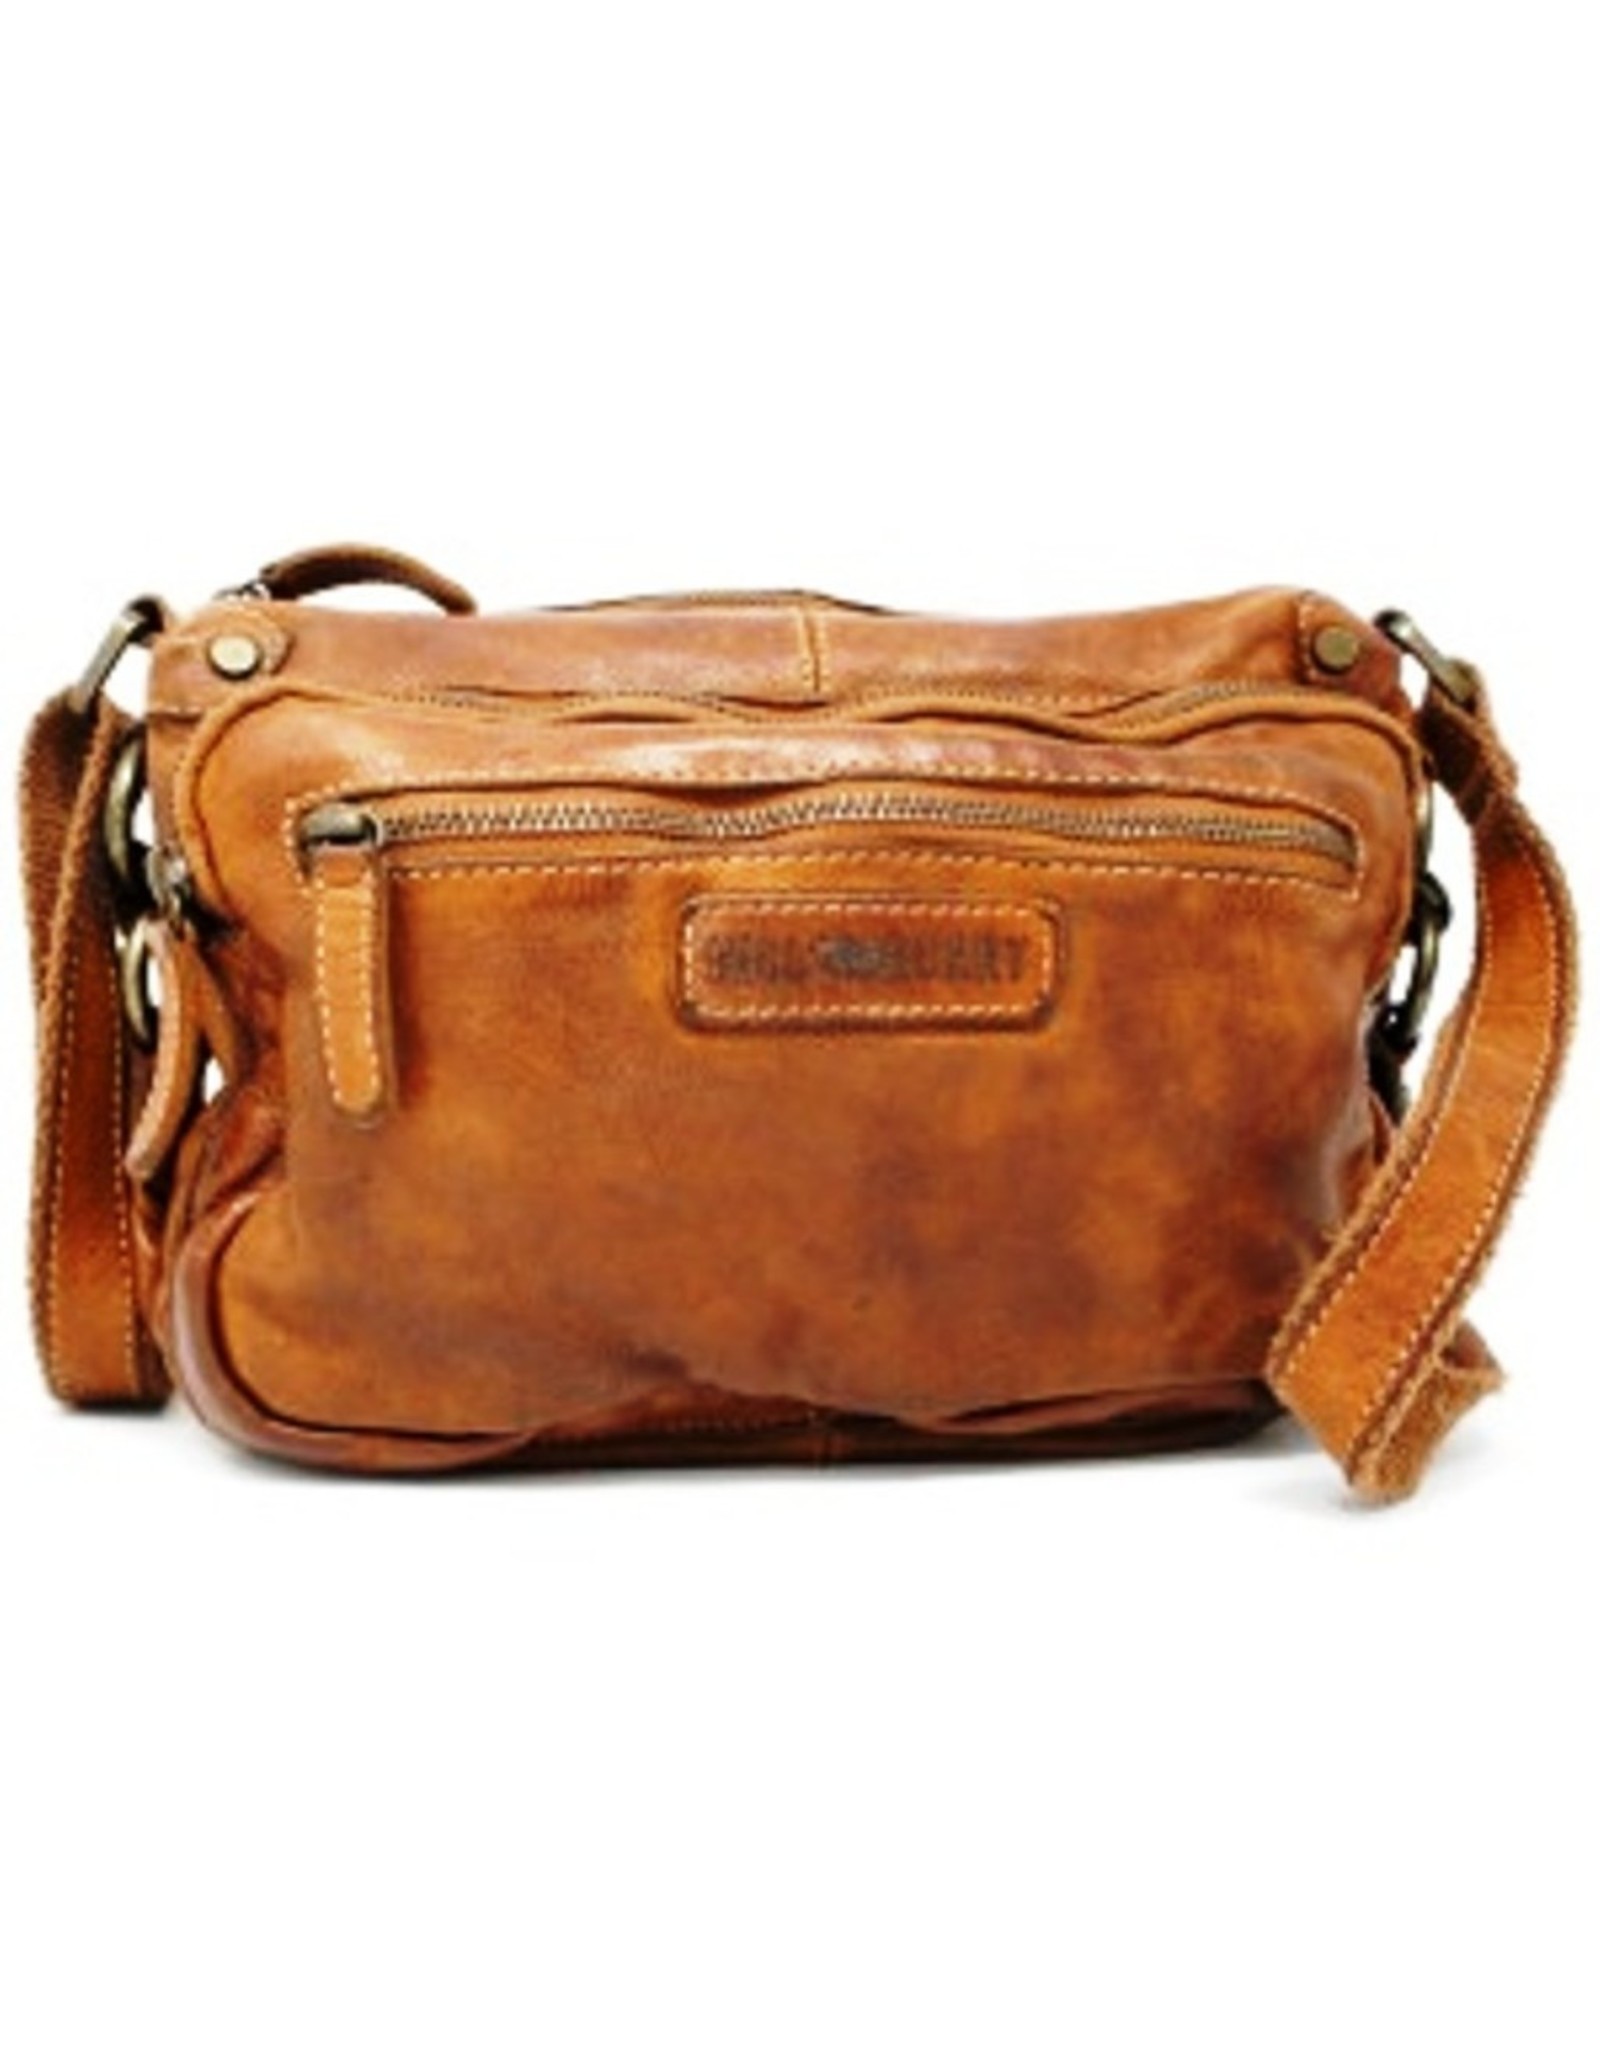 HillBurry Leather bags - HillBurry Leather Shoulder bag of Washed Leather tan